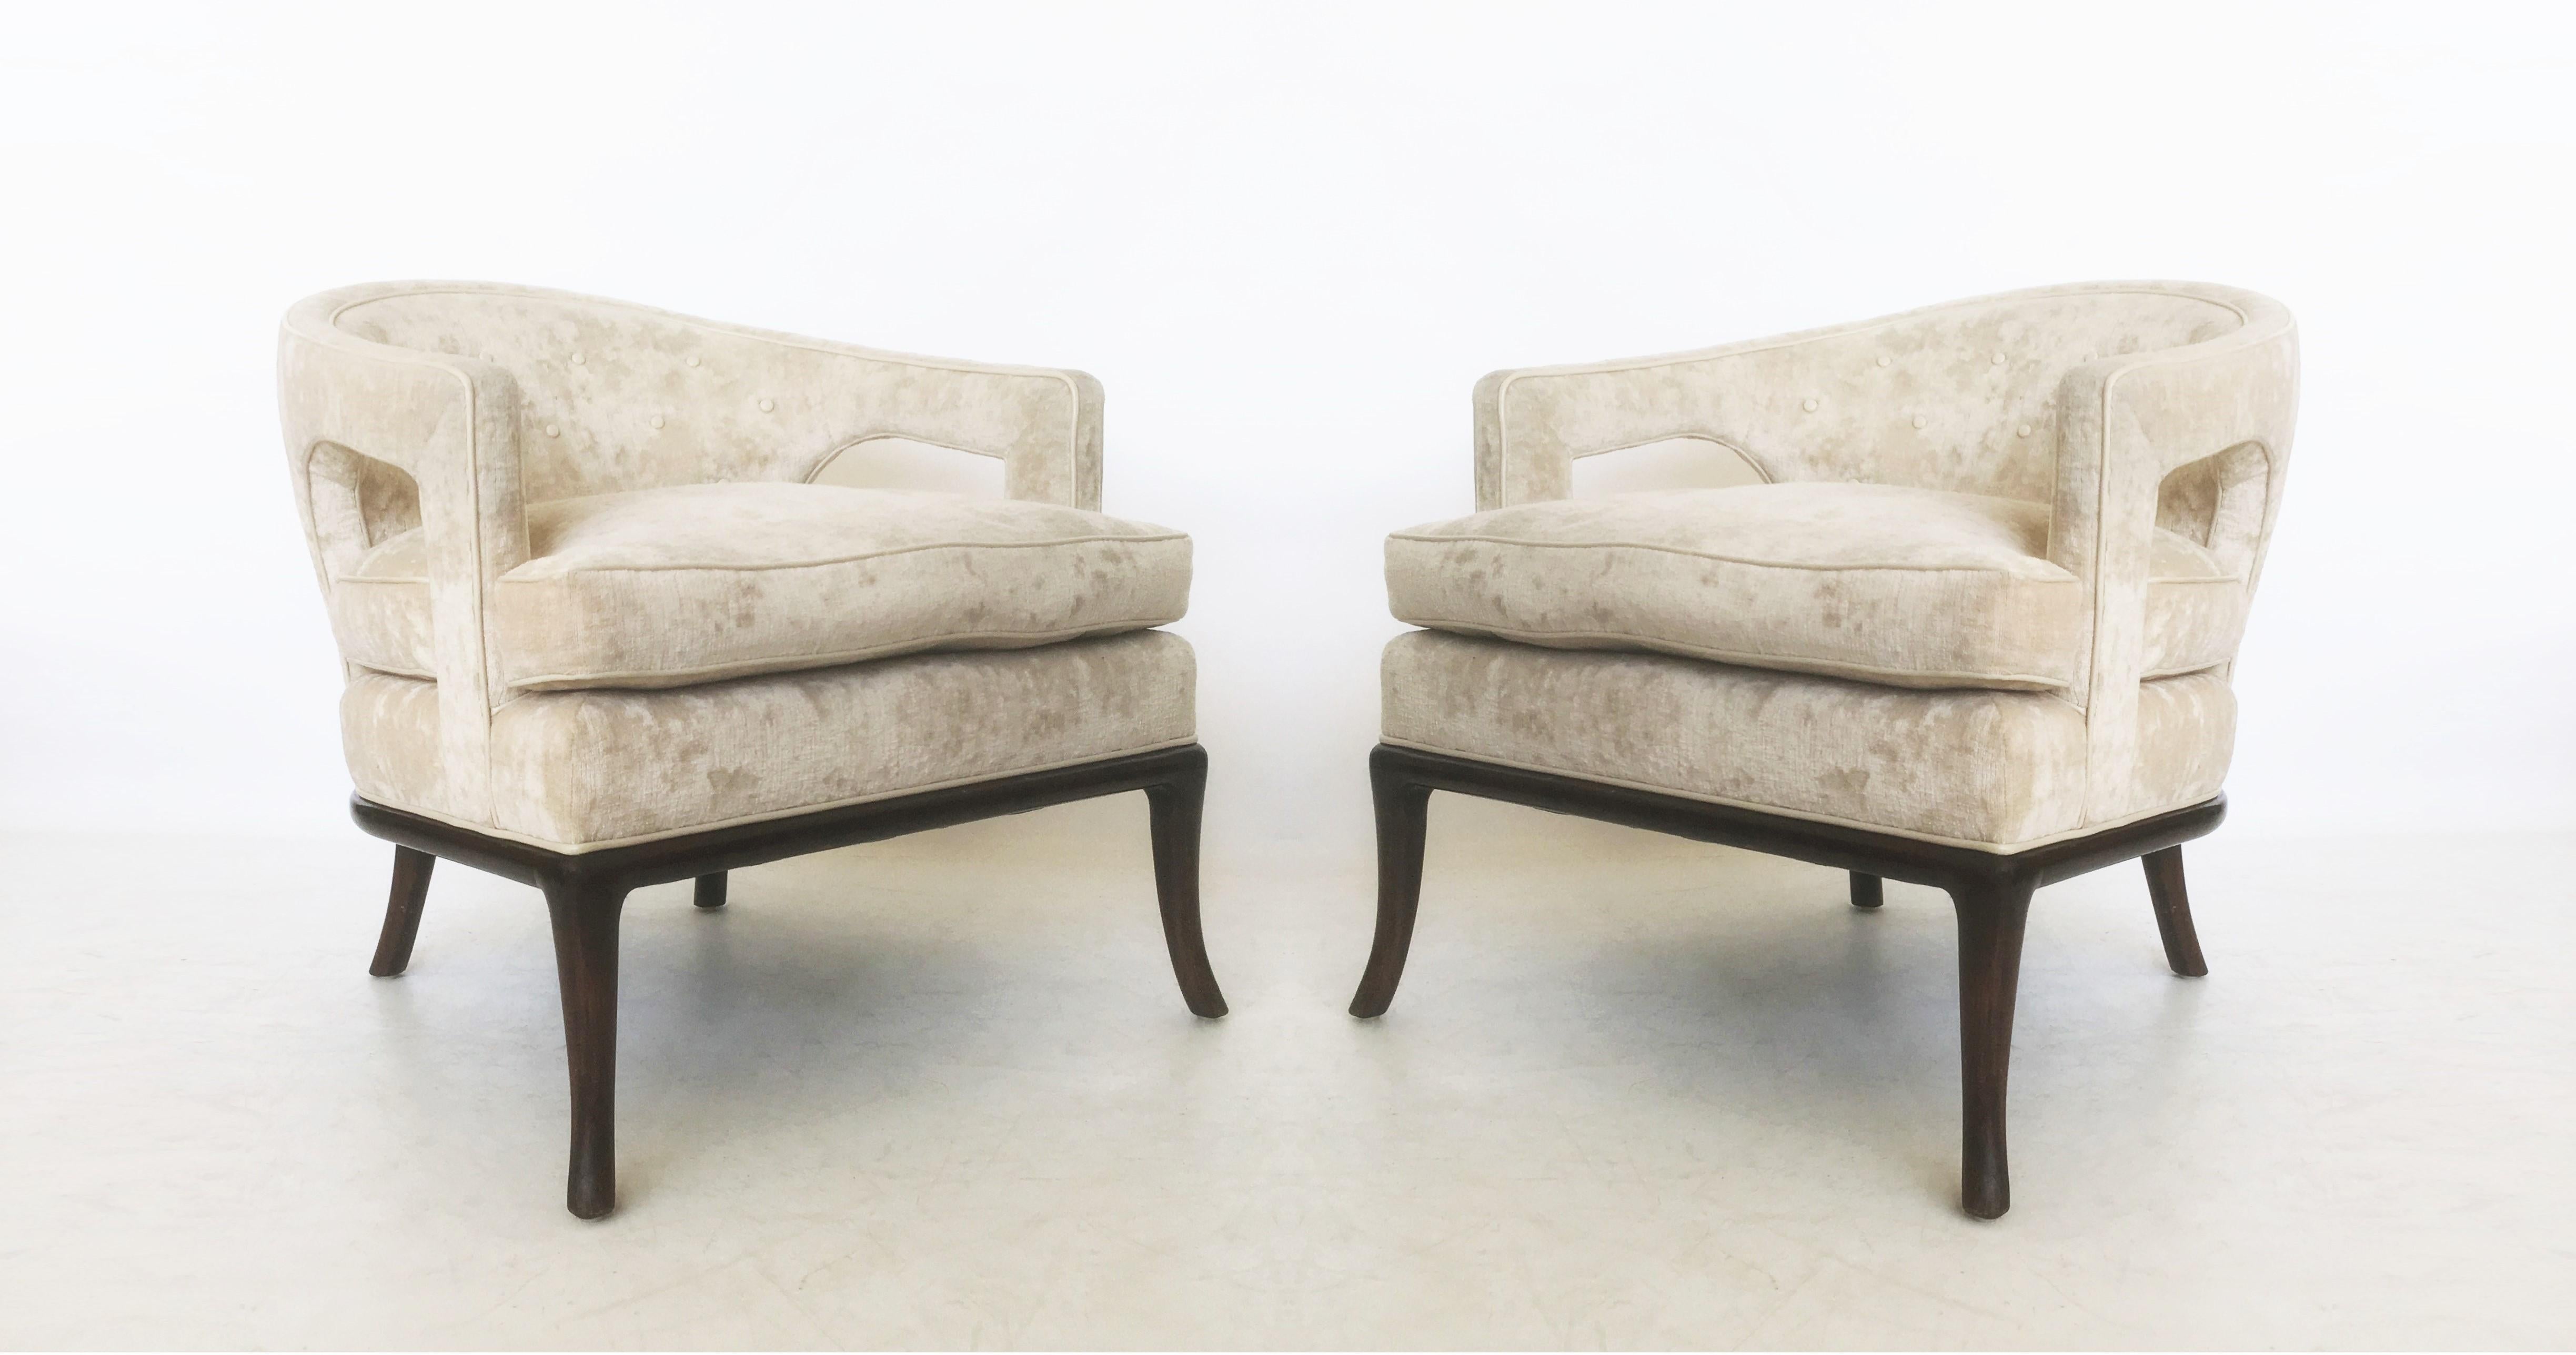 Pair of upholstered club chairs by T.H. Robsjohn-Gibbings for Widdicomb, American, 1950s. The chairs feature barrel-backs with cut-out arms and sculpted legs. Upholstered in a cream colored velvet, features a leather button-tufted back and leather